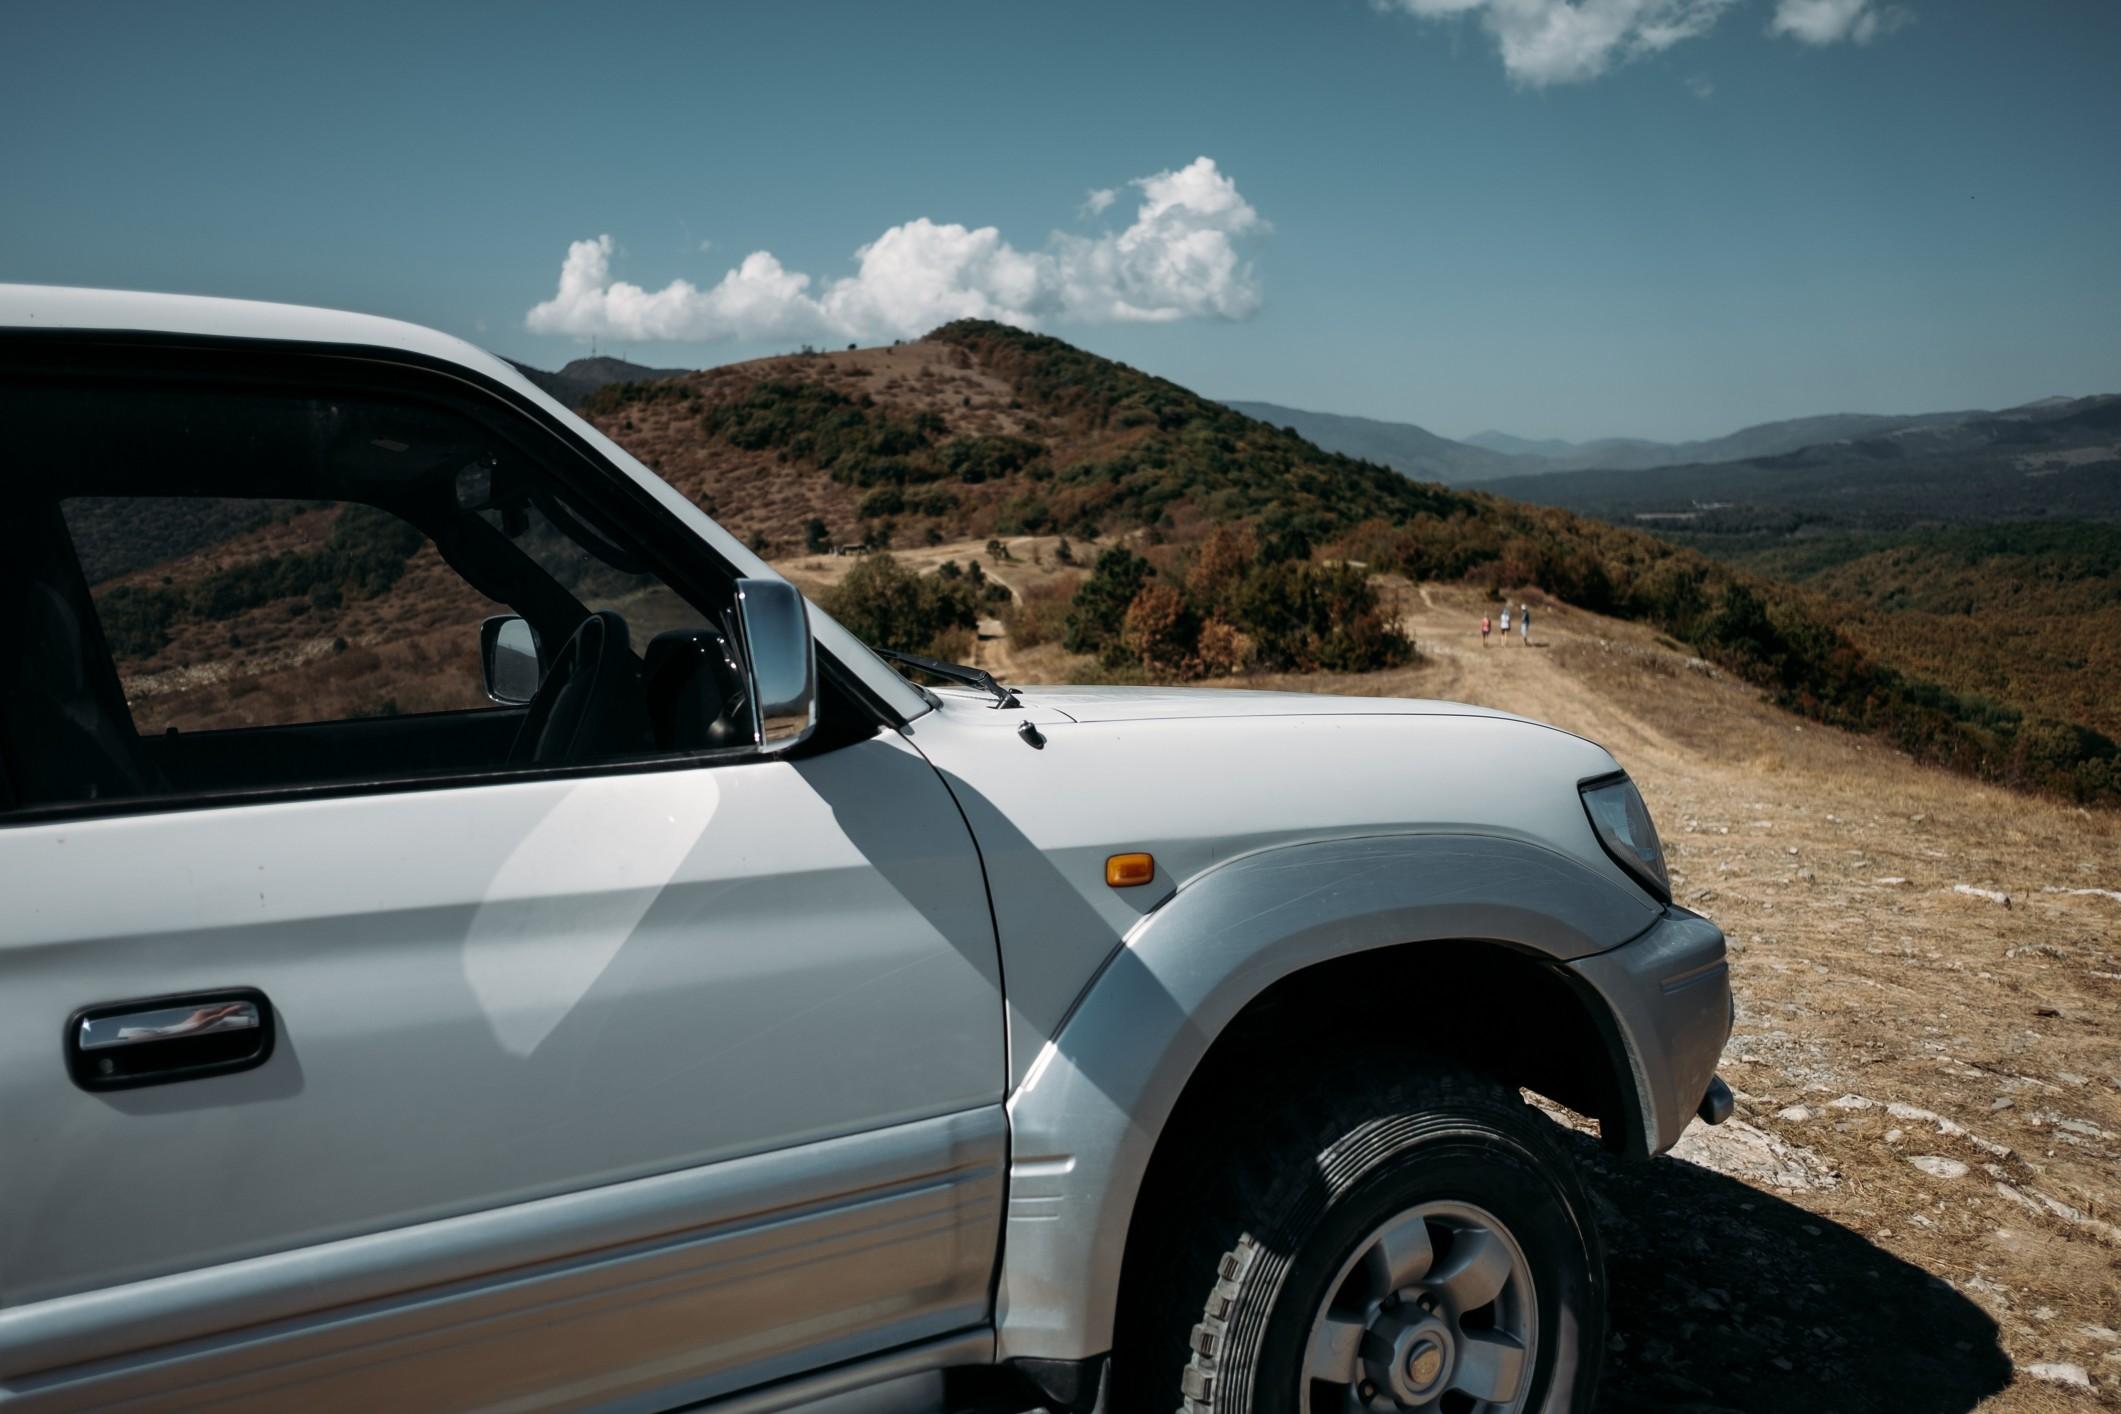 If you're looking for a car for off-roading adventures, there are some factors to consider.  